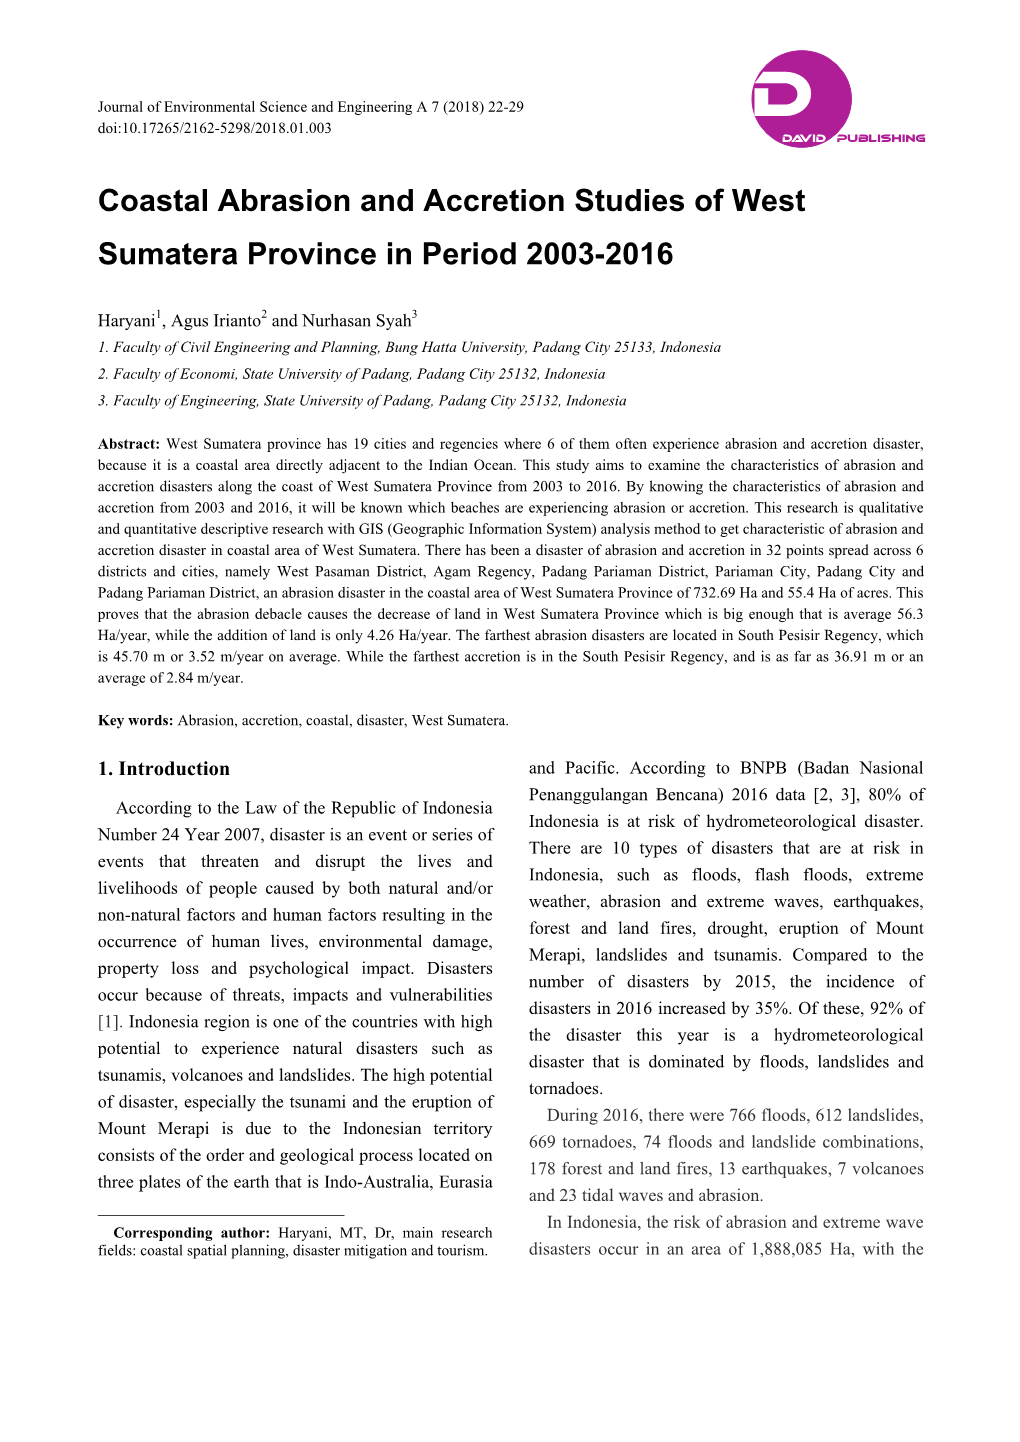 Coastal Abrasion and Accretion Studies of West Sumatera Province in Period 2003-2016